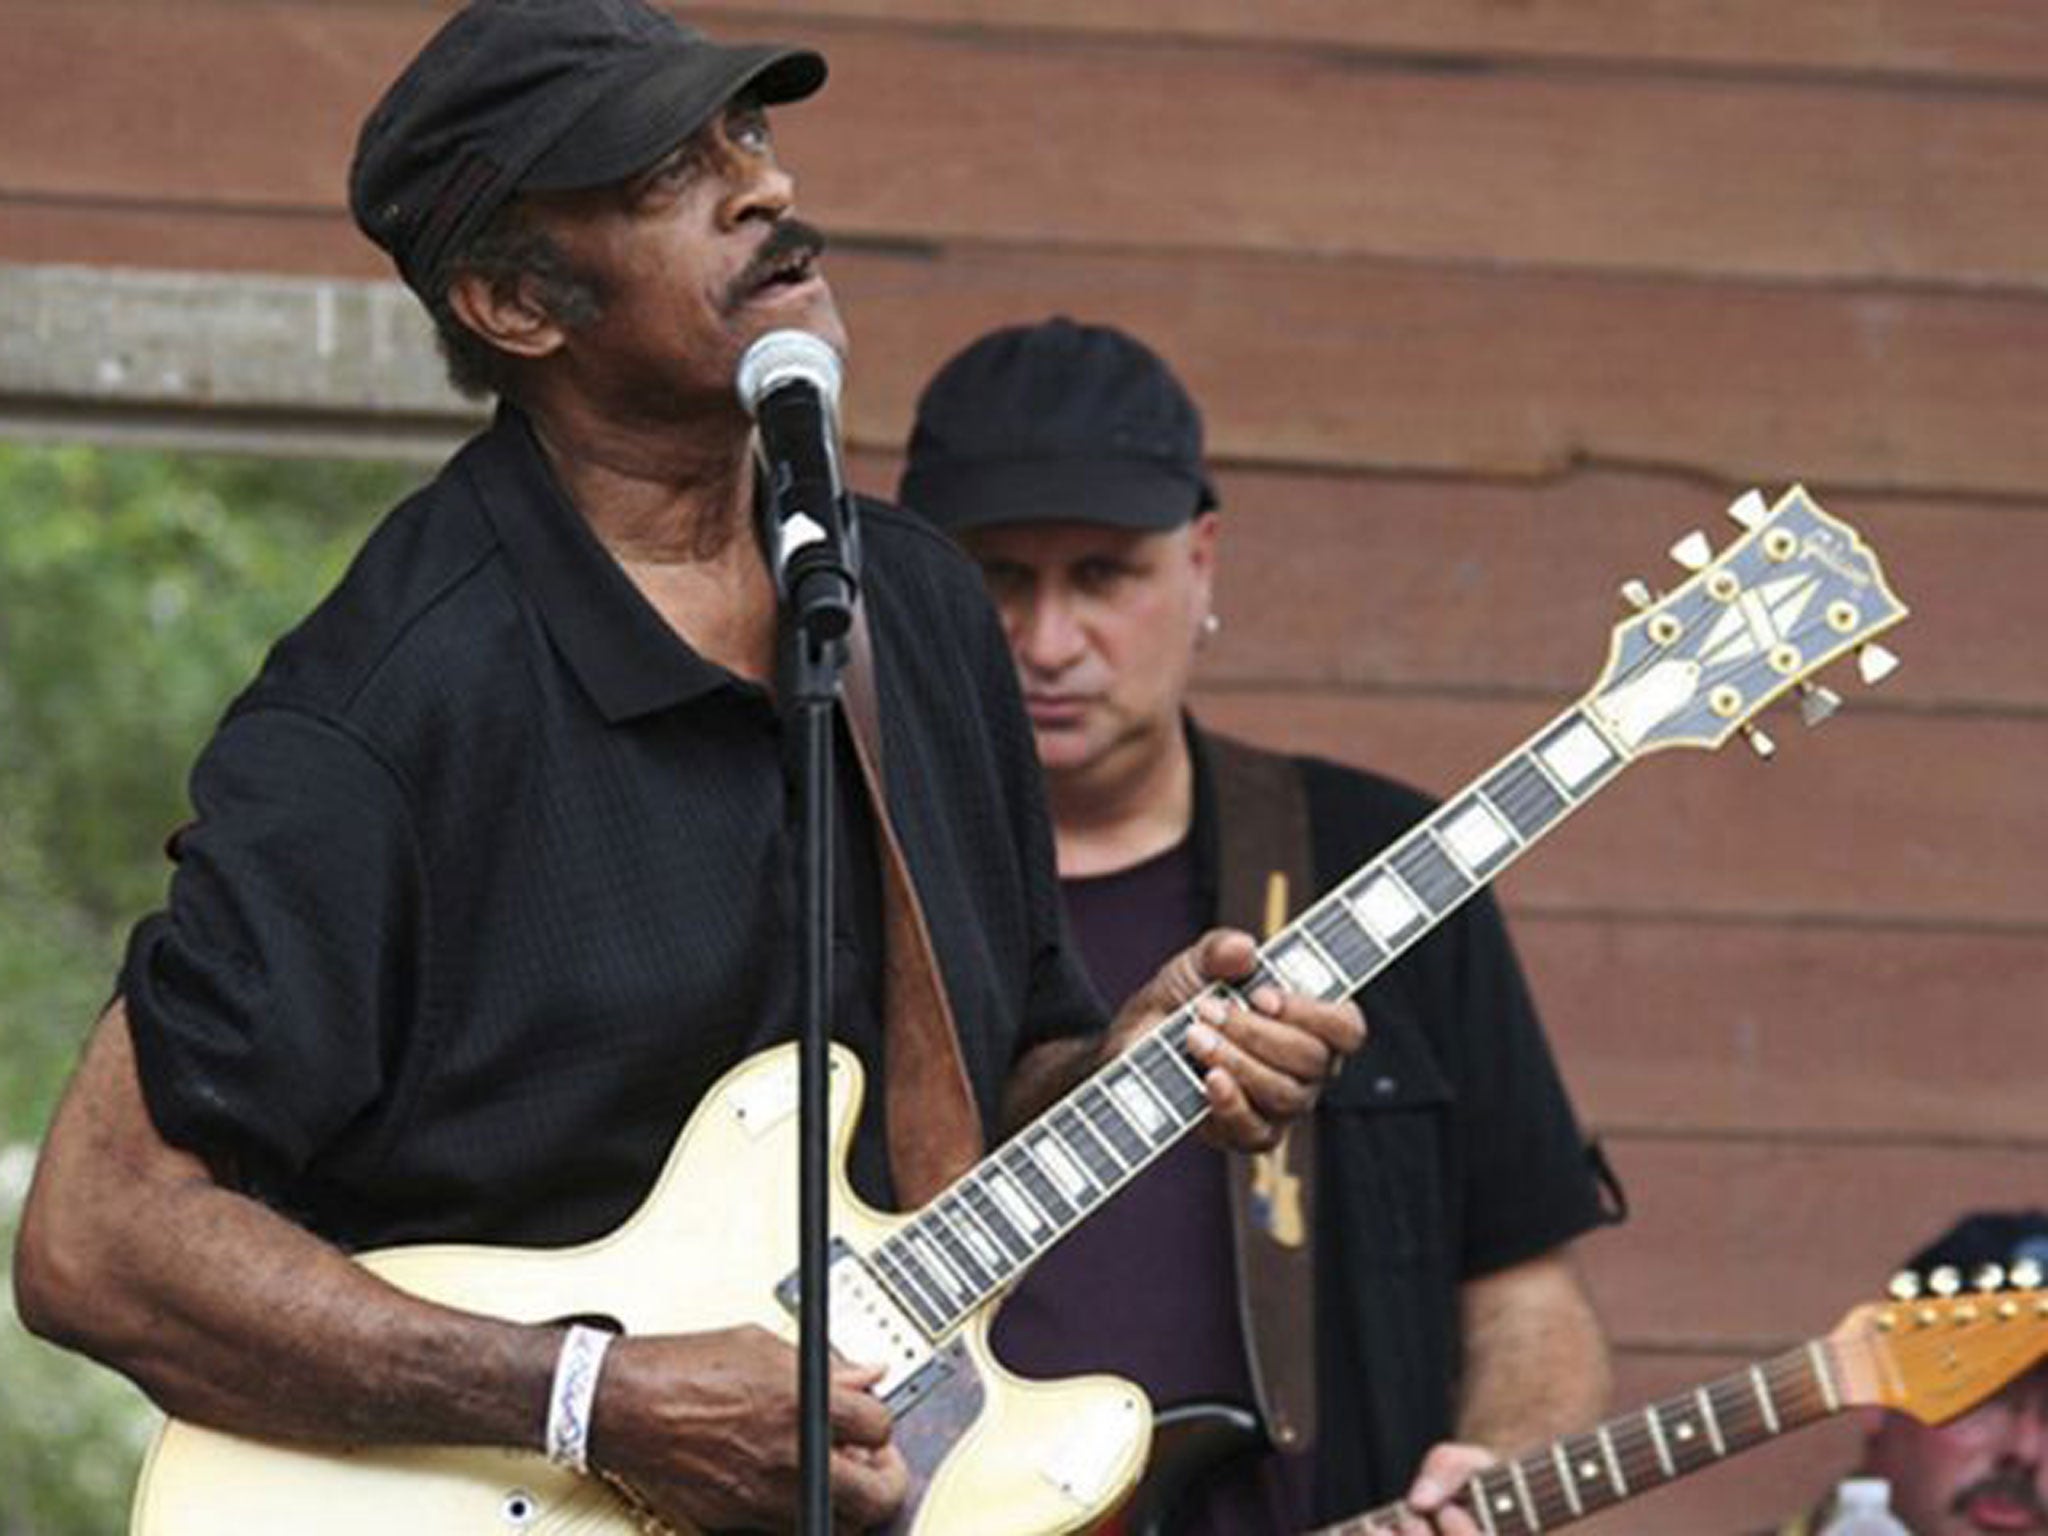 Jimmy “Fast Fingers” Dawkins, who died on 10 April aged 76, was a Chicago bluesman known for his guitar playing and his mellow singing voice